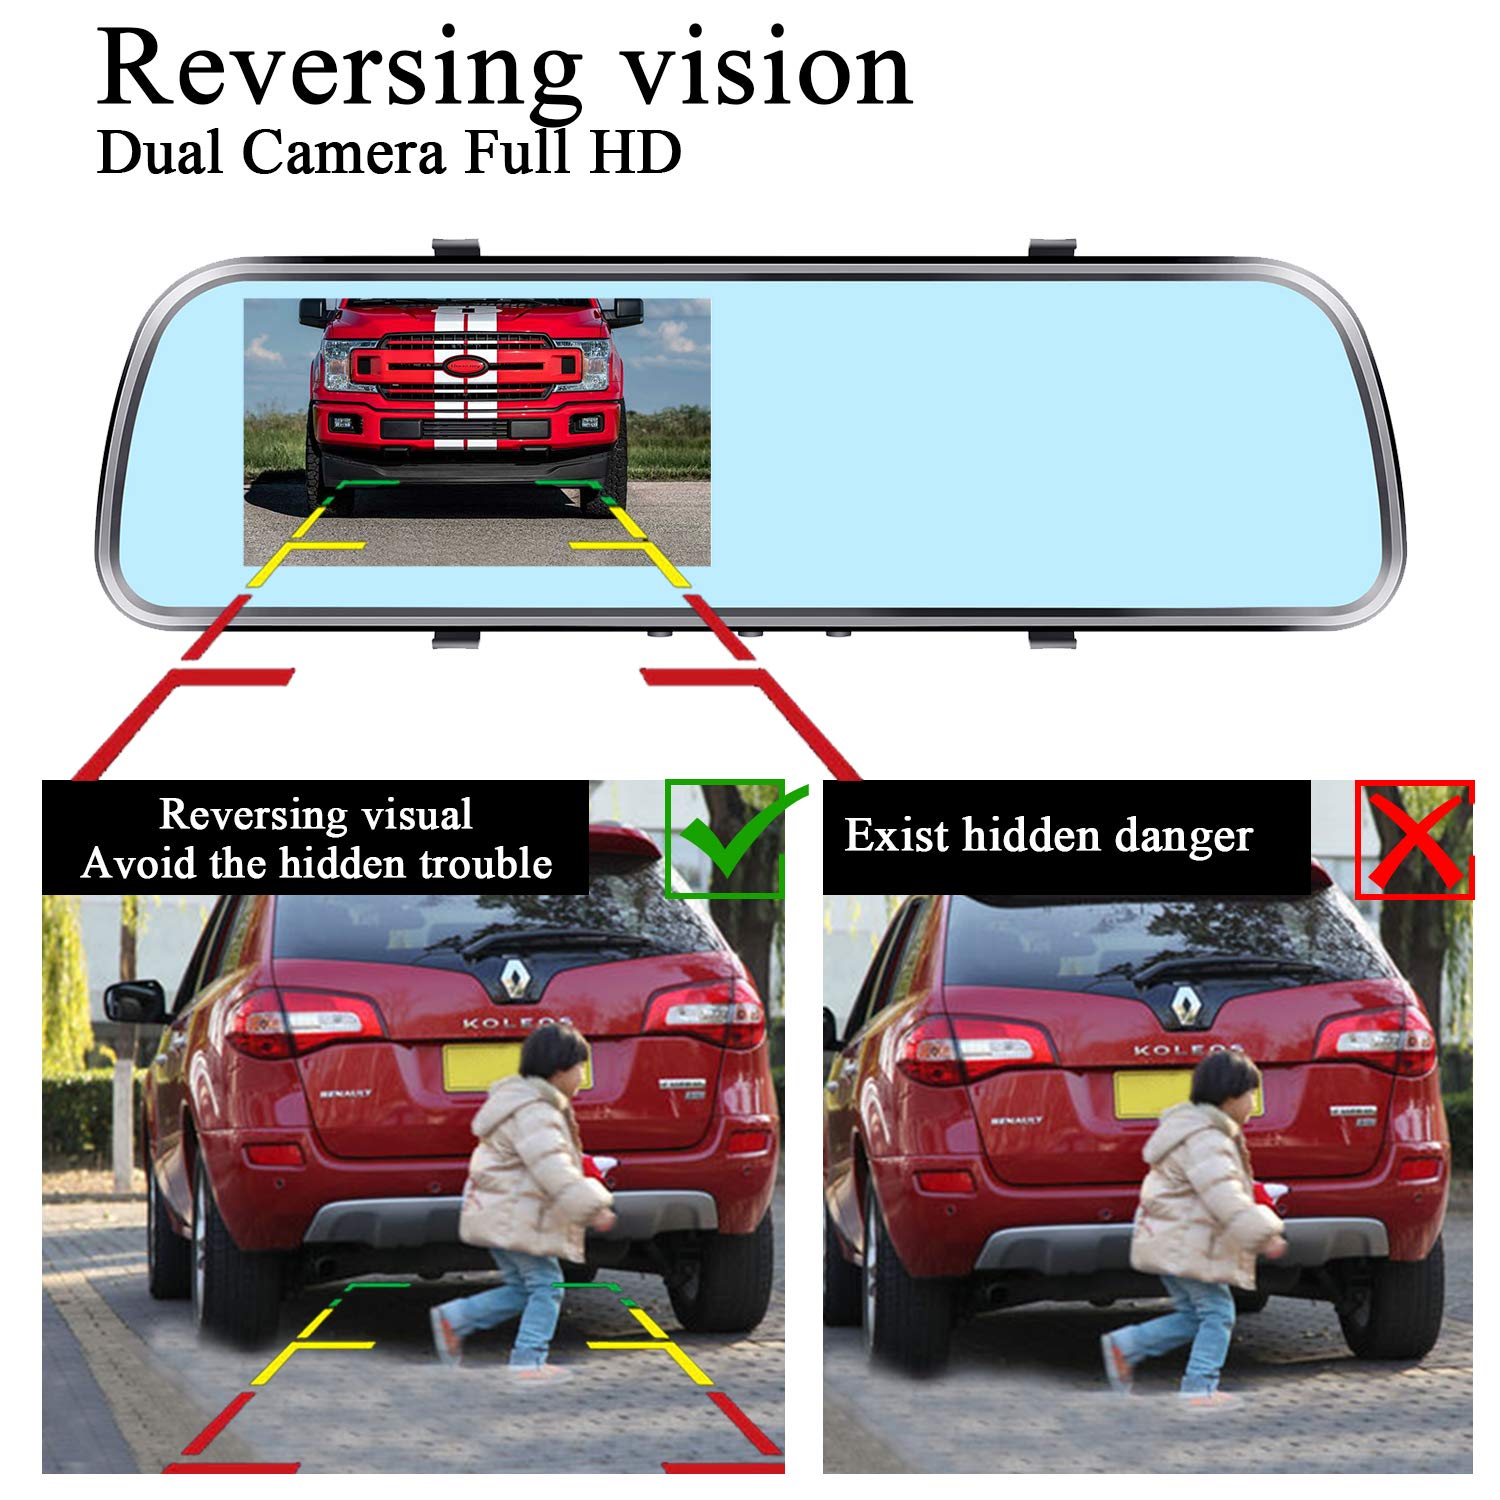 Amtifo Backup Camera Mirror HD 1080P - Plug and Play Easy Set up Color Night Vision Rear View Mirror with License Plate Camera for Car